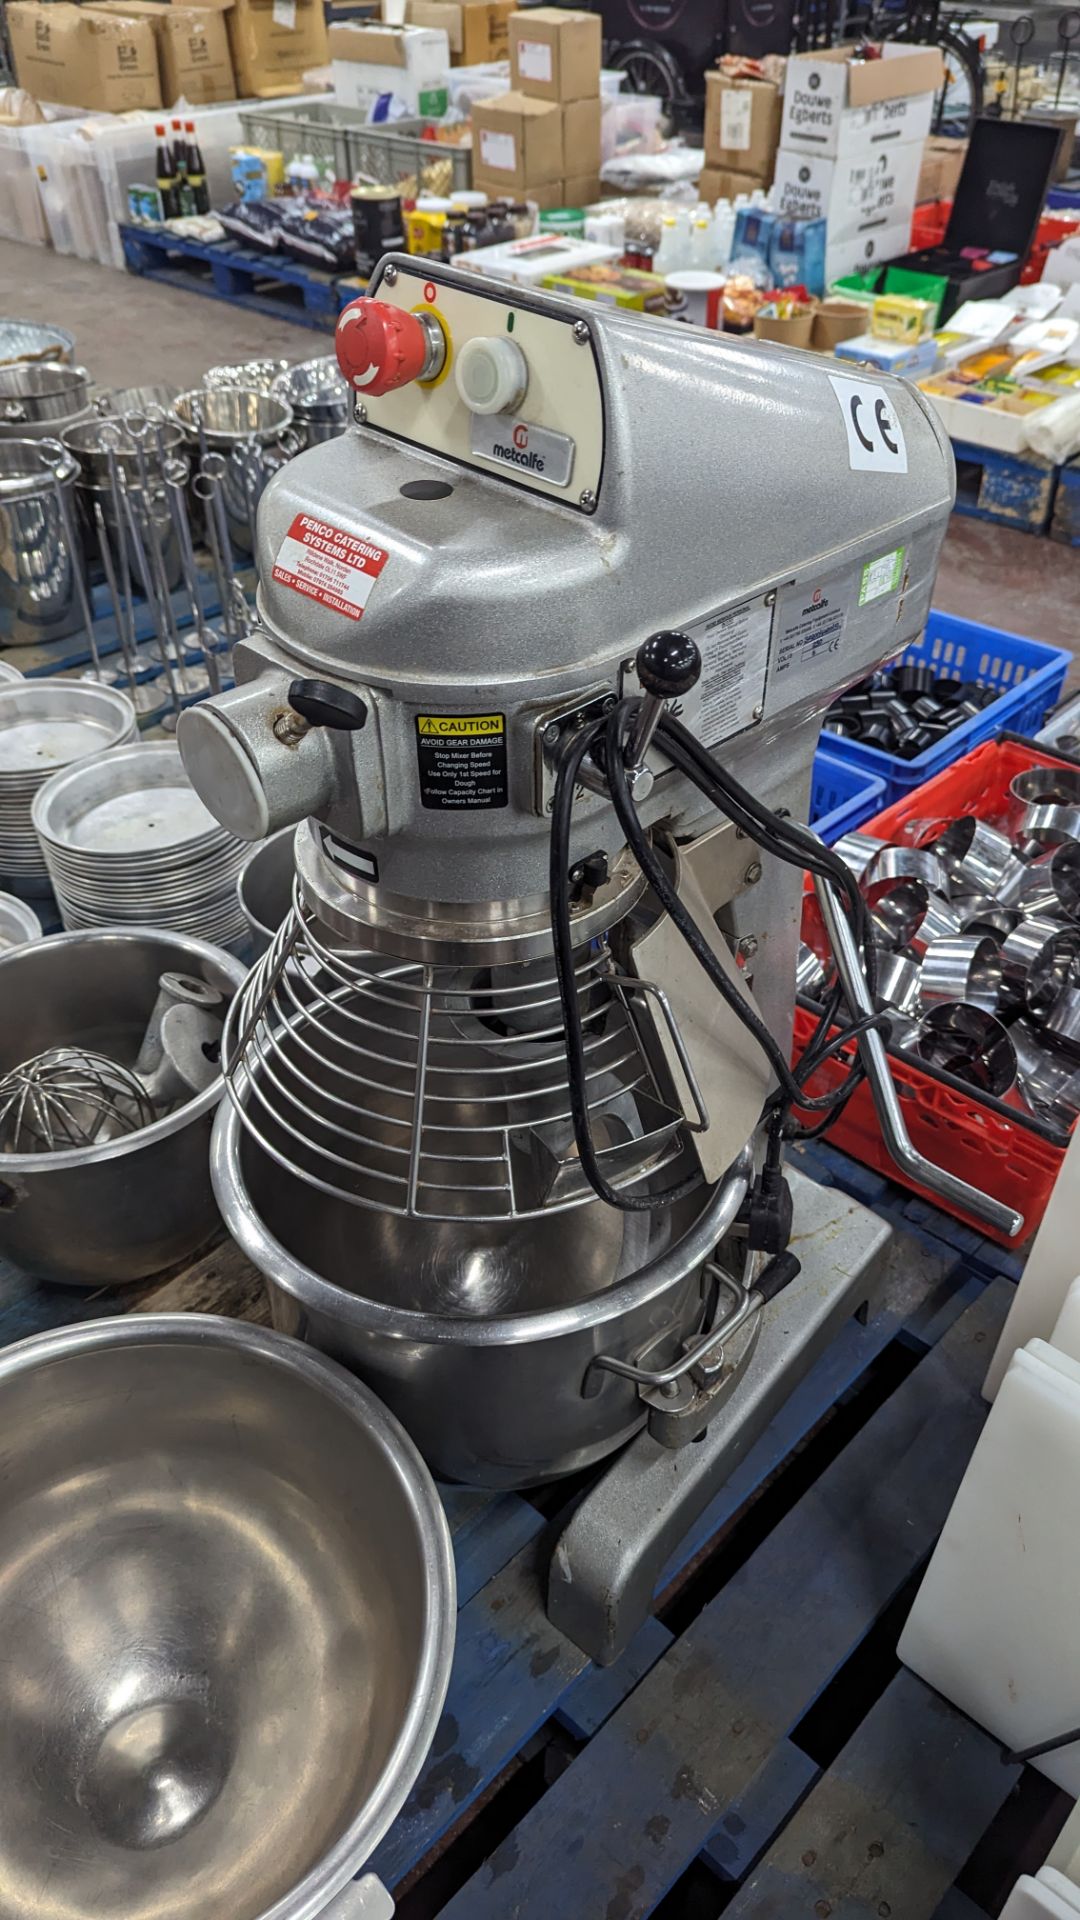 Metcalfe heavy duty commercial food mixer including quantity of bowls, blades, paddles & similar - Image 2 of 11